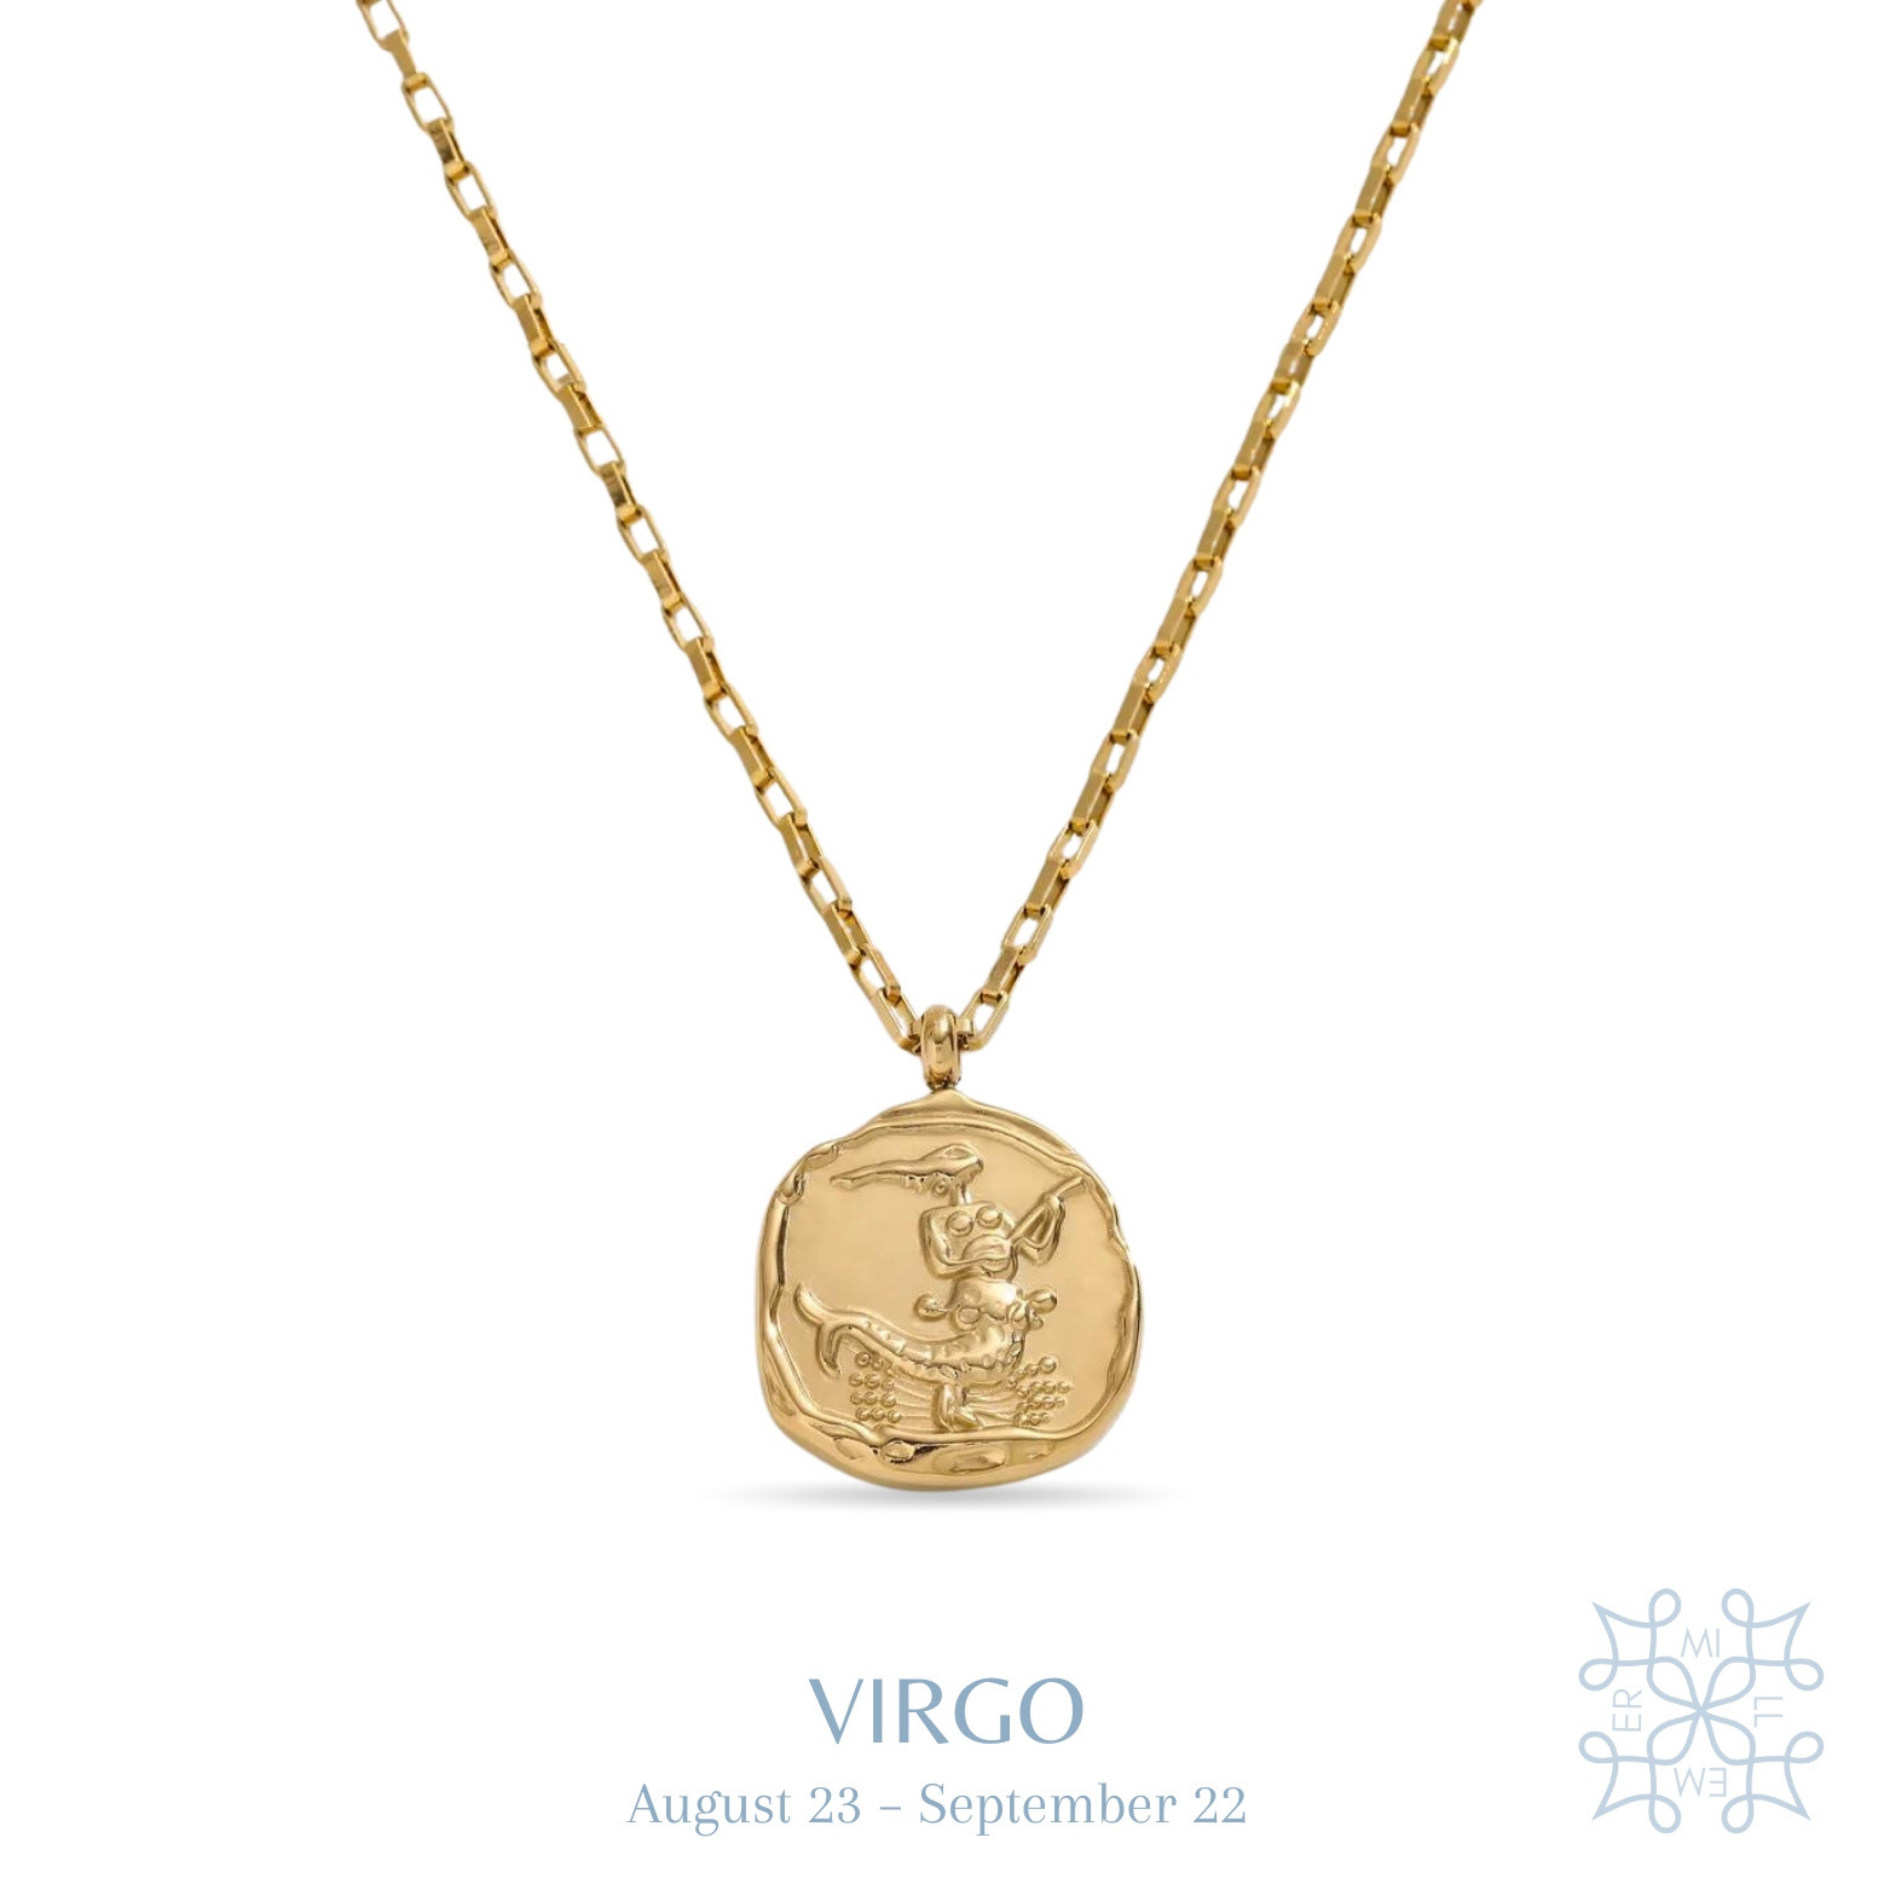 Irregular shape round medallion with Virgo symbol in the middle. Gold plated chain and medallion necklace. Virgo medallion gold necklace.